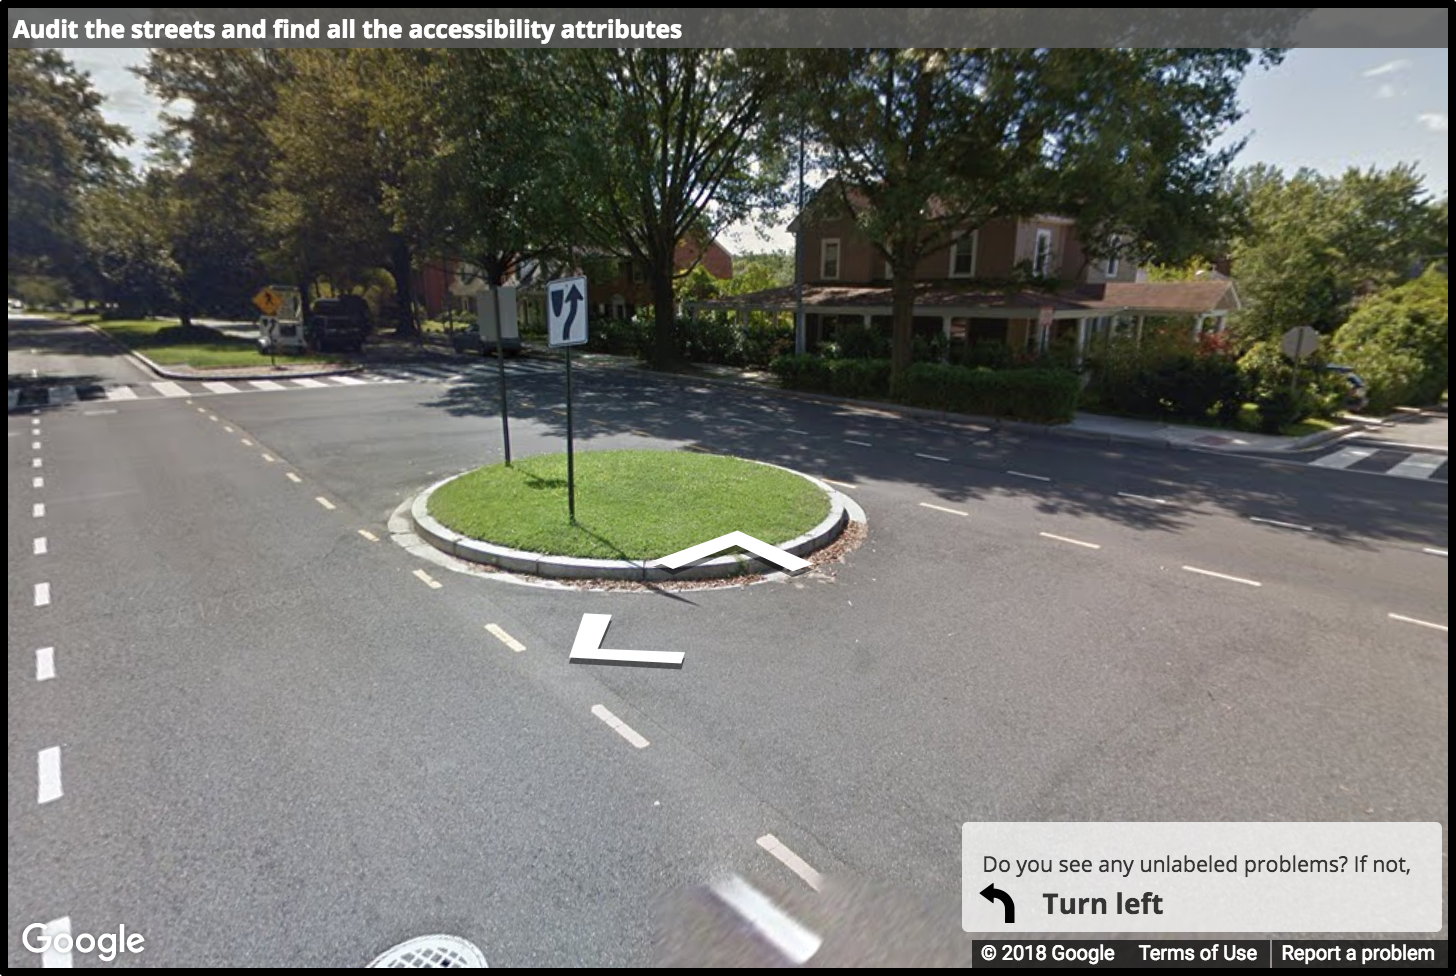 A Street View image of an island that does not interfere with the crosswalk